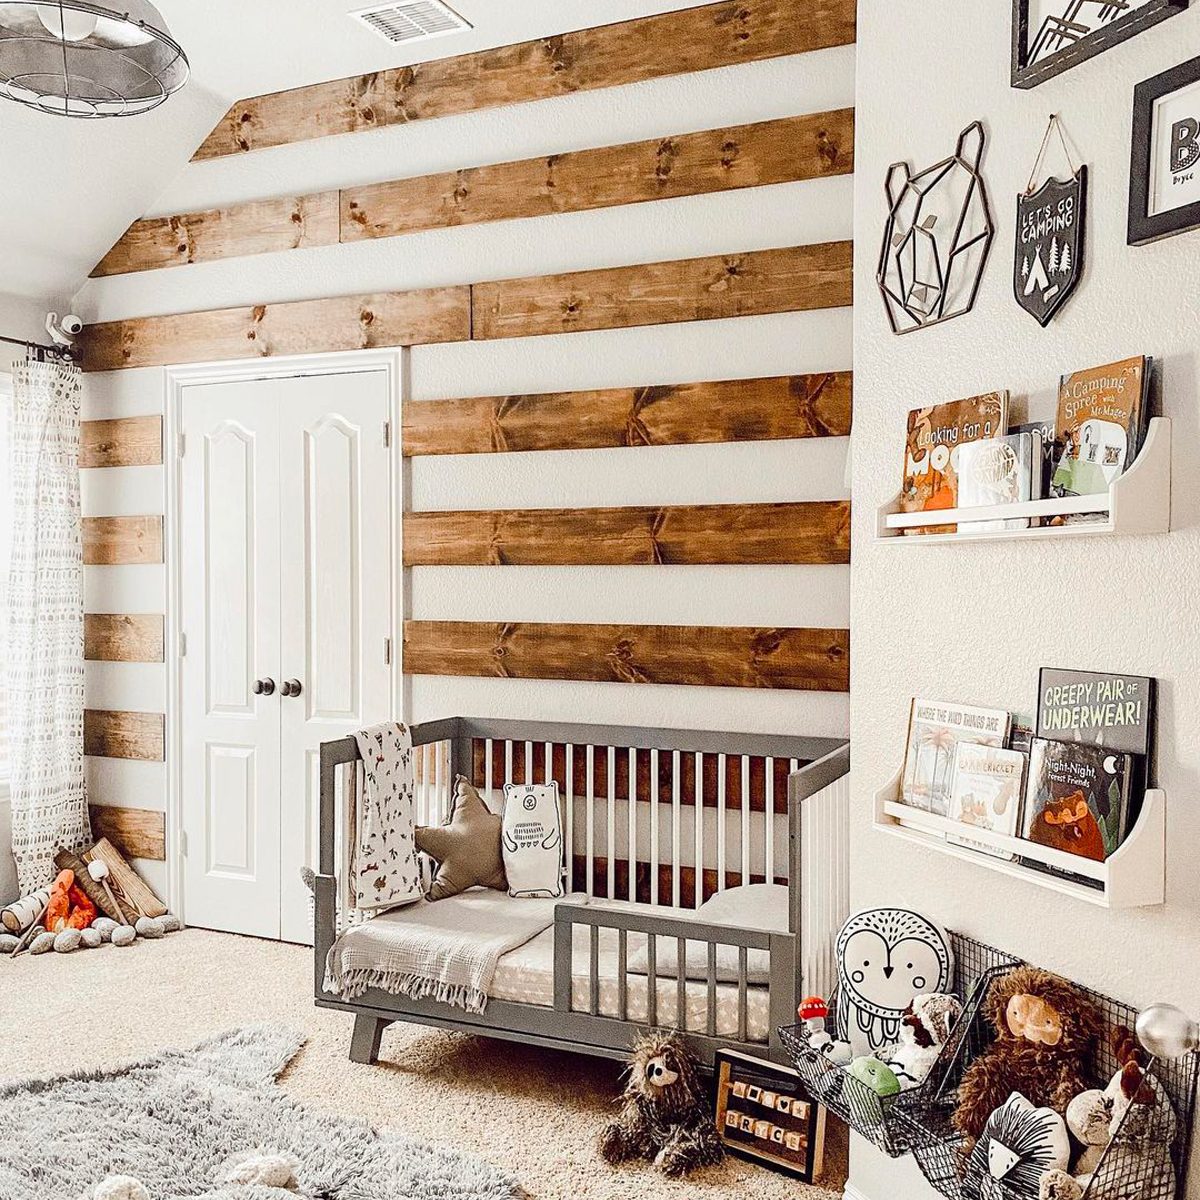 Real Weathered Wood Planks Walls Rustic Reclaimed Barn Wood Paneling Accent  Walls, Easy Nail up Application 